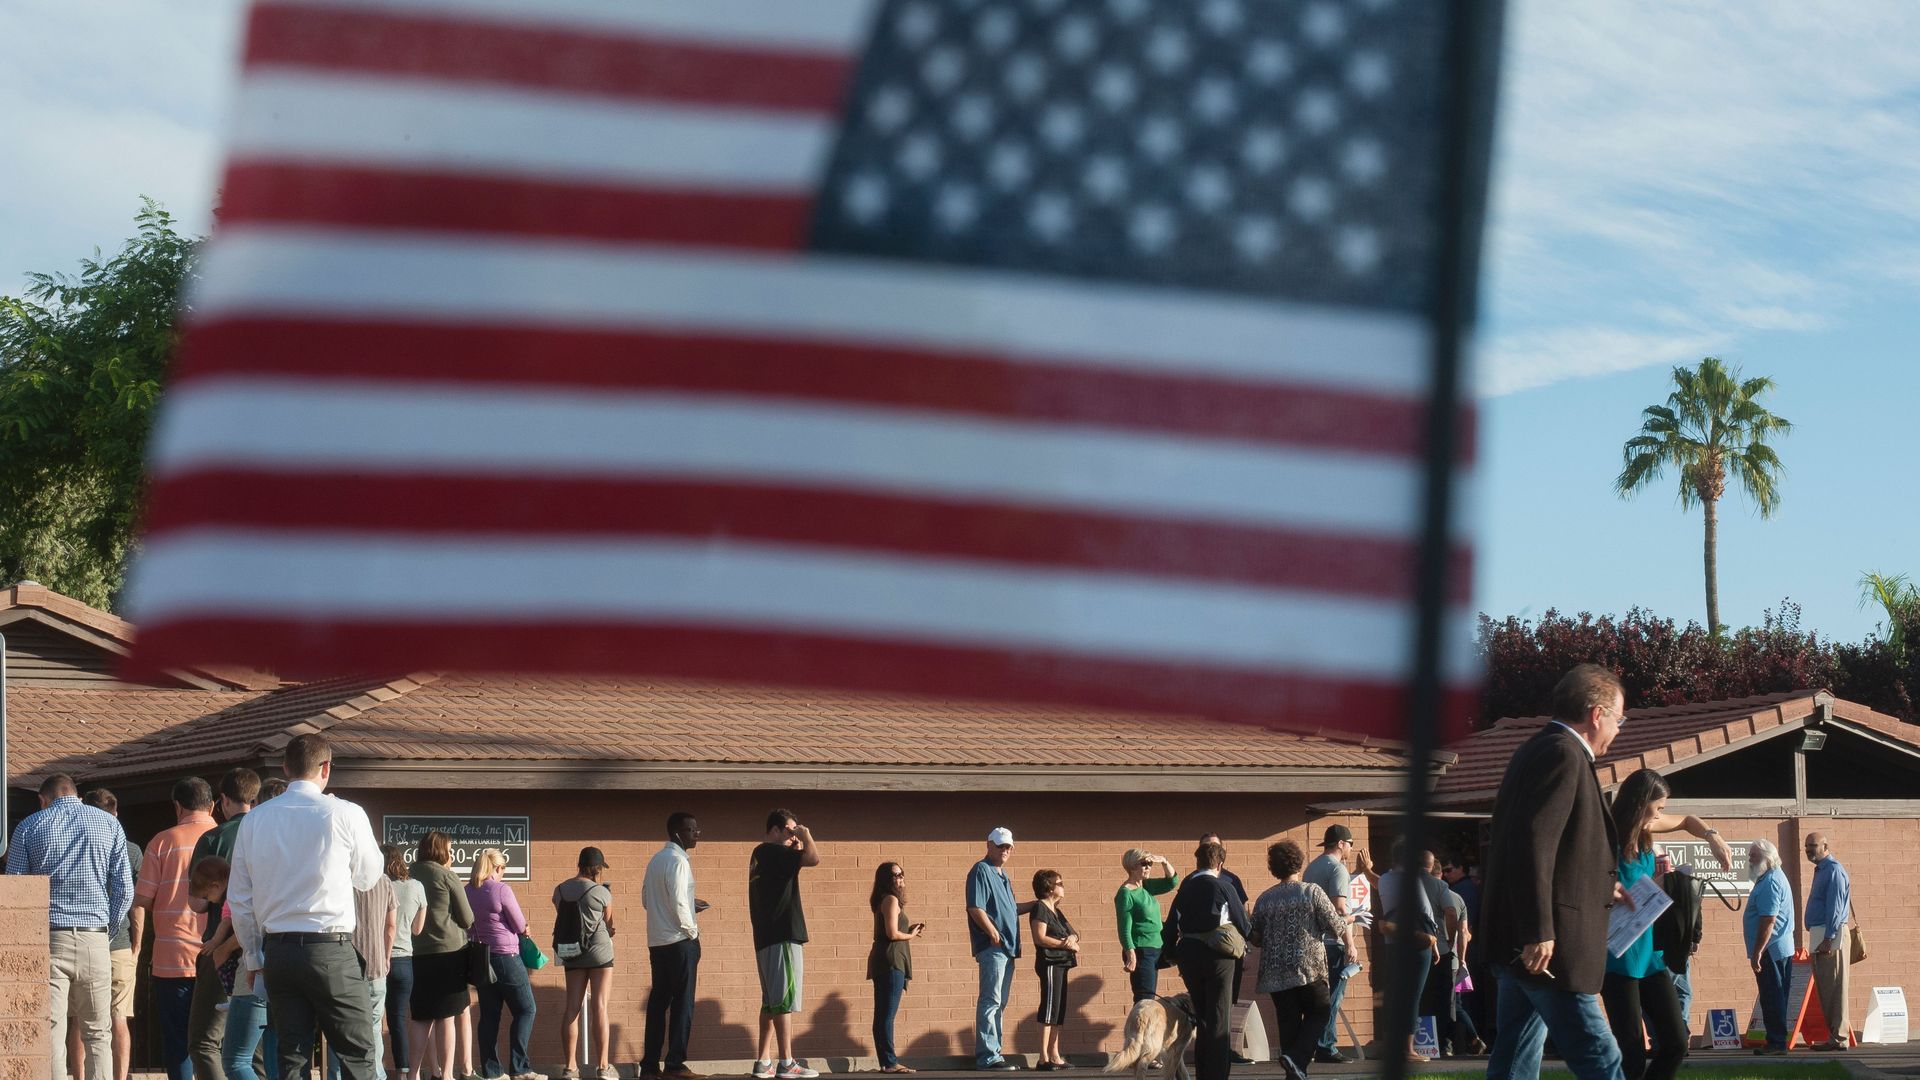 Voters wait in line in front of a polling station to cast their ballots in the 2016 presidential election